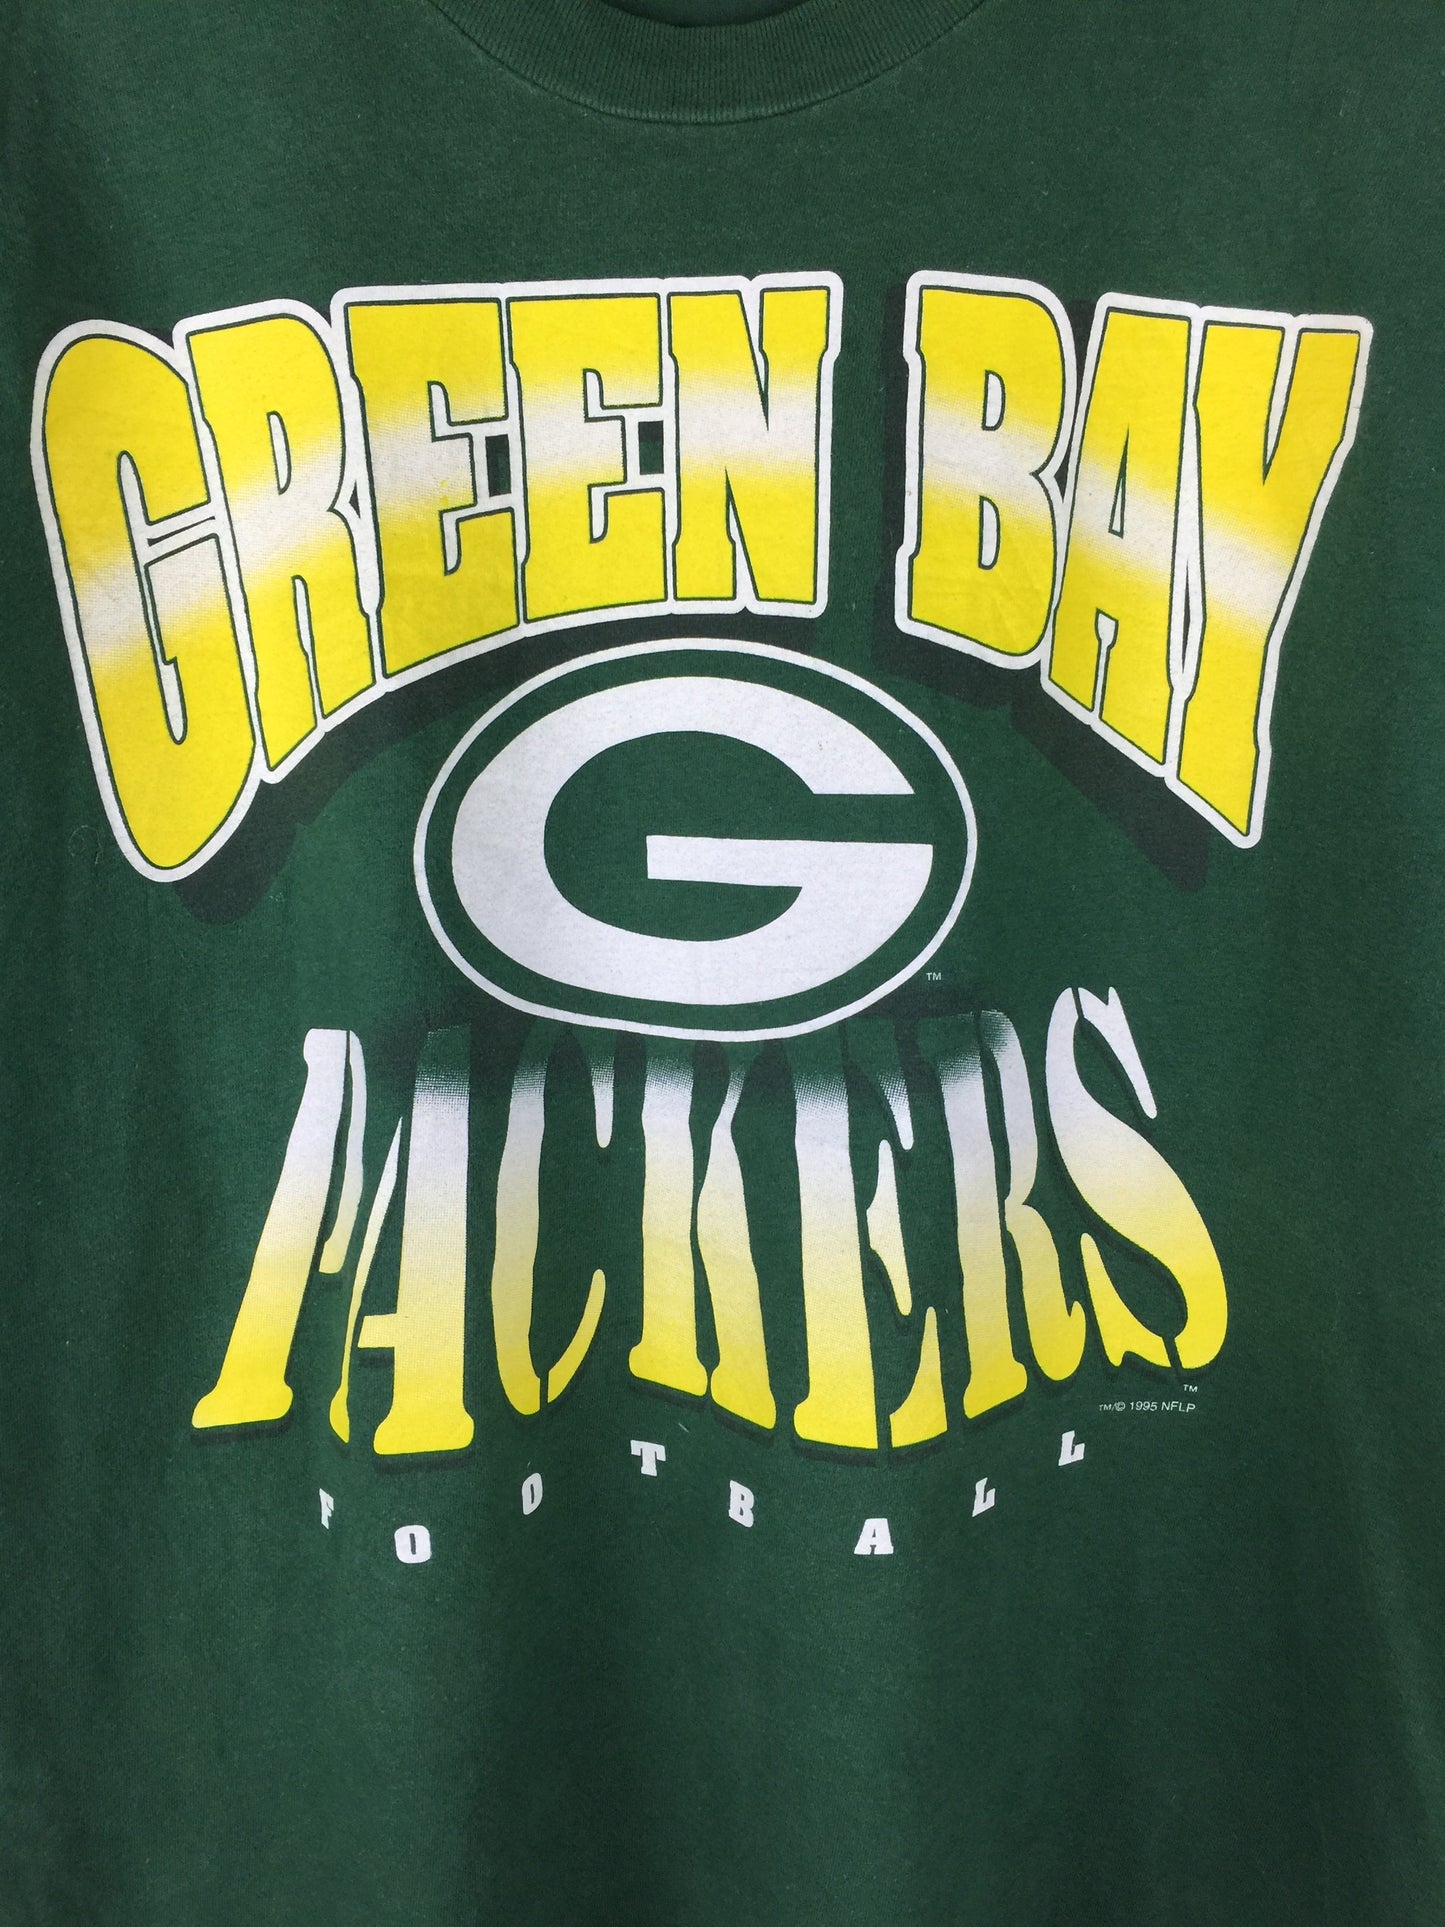 Vintage Green Bay Packers NFL 1995 Team T-shirt